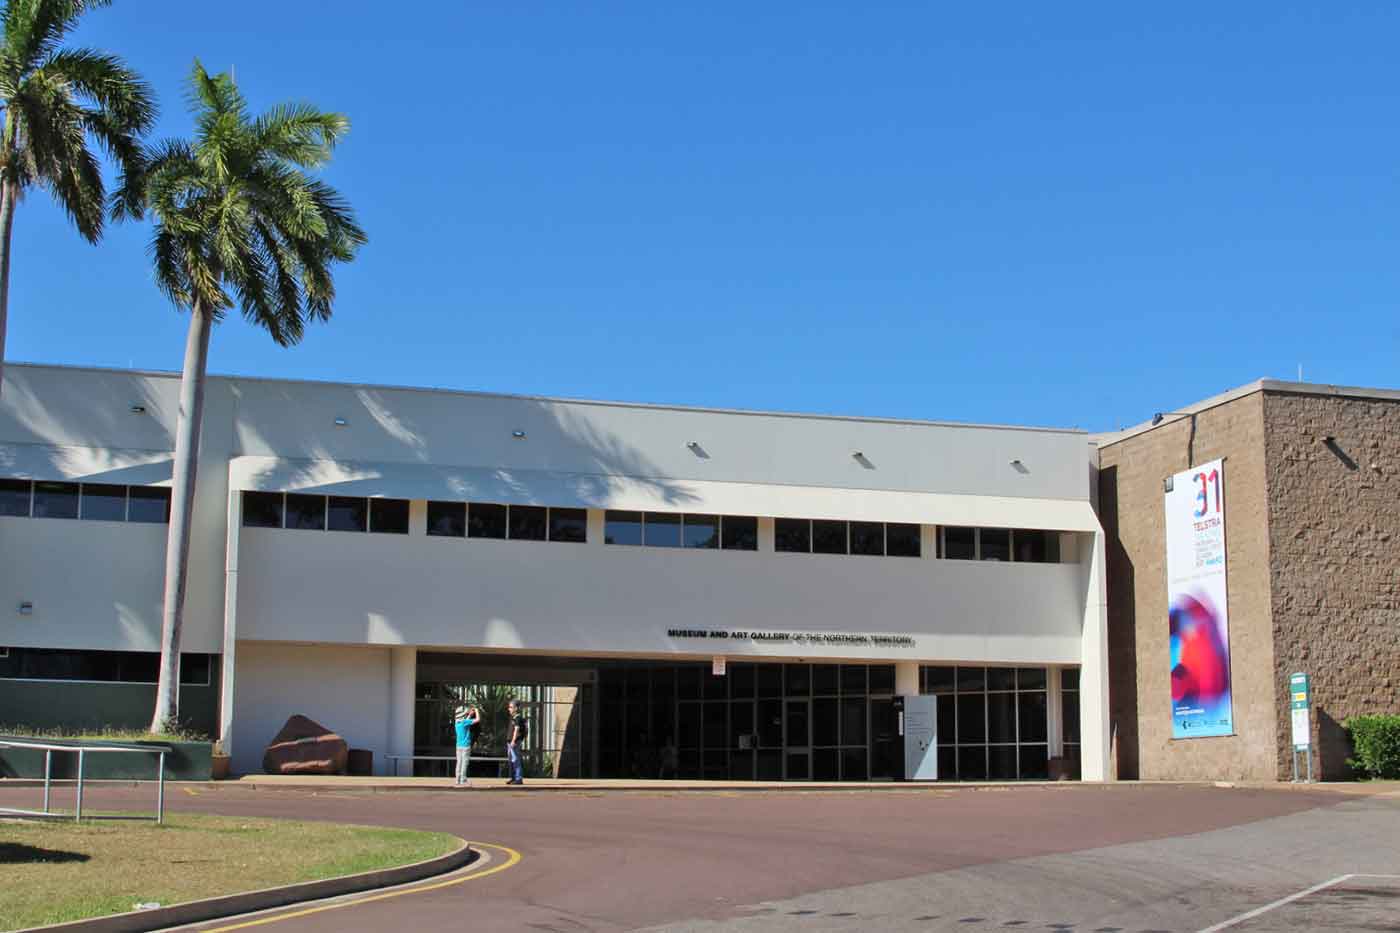 Museum and Art Gallery of the Northern Territory (MAGNT)